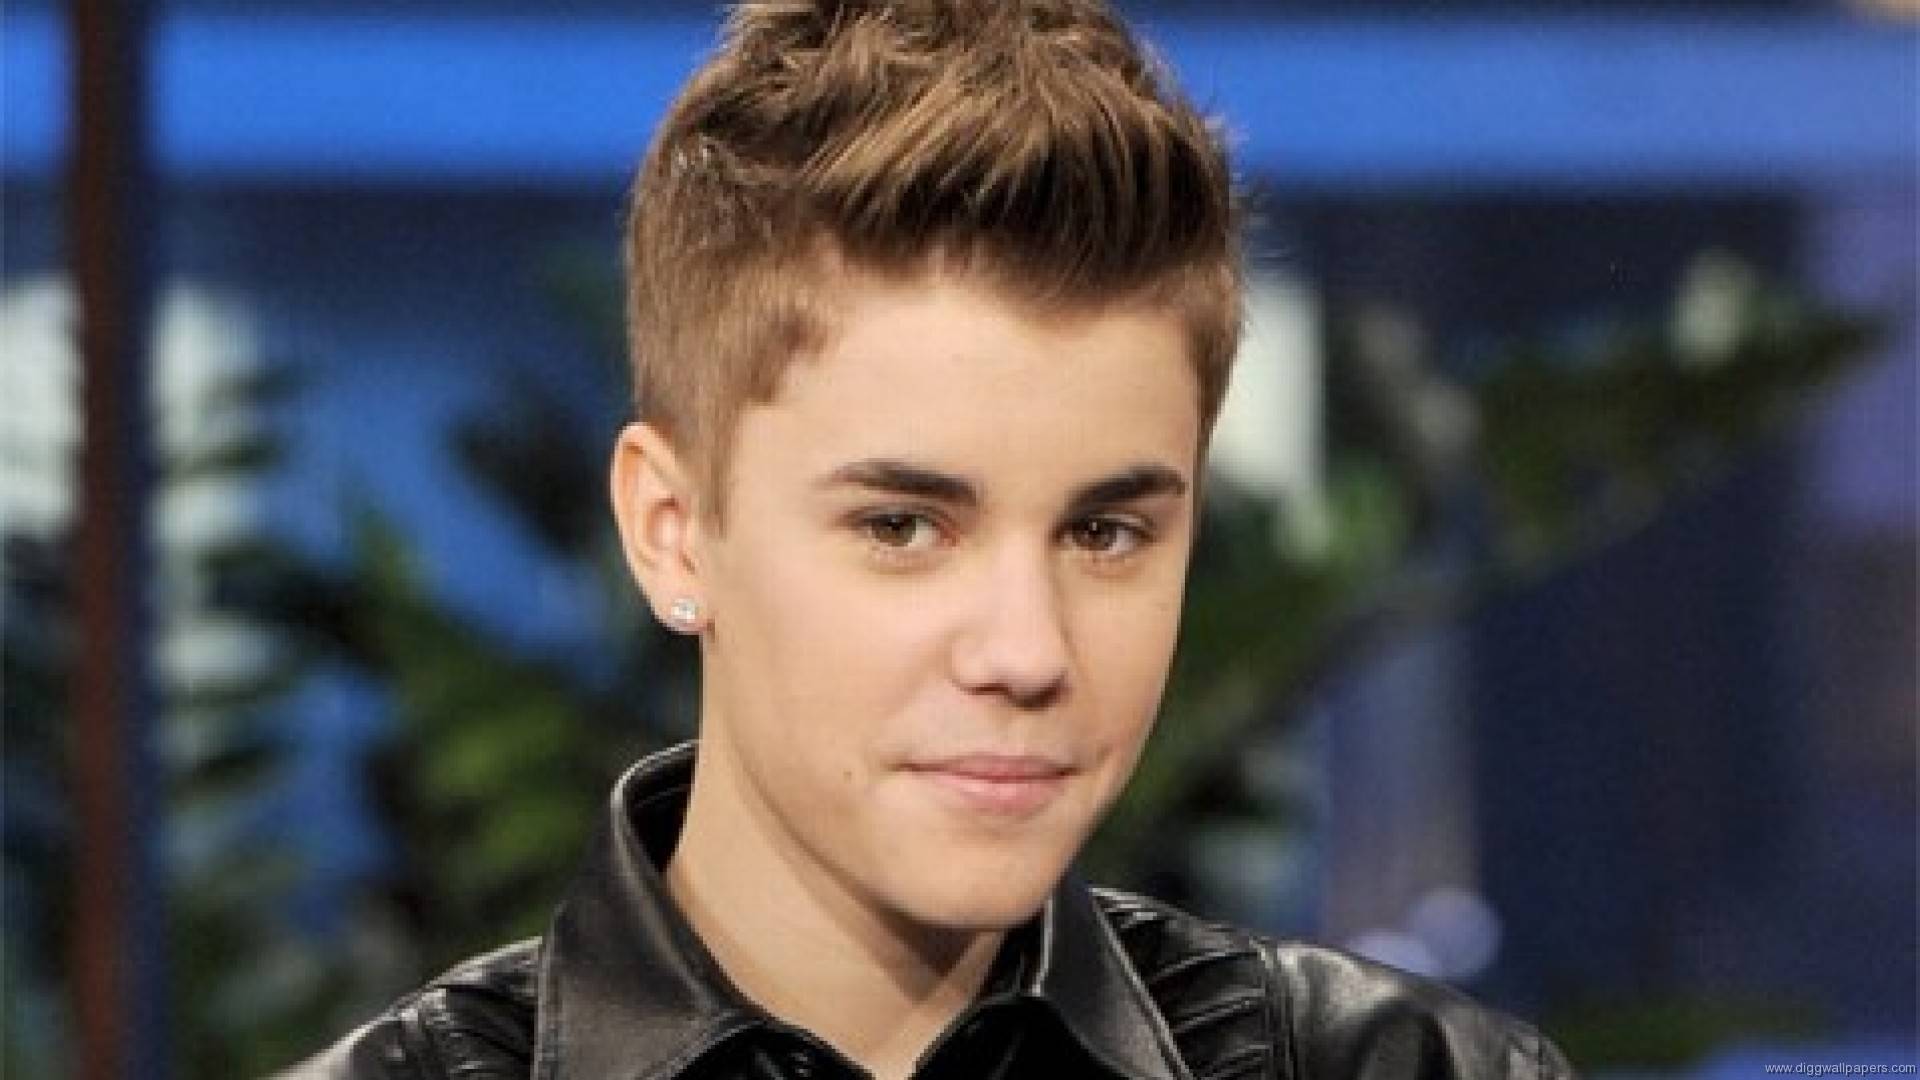 New Haircut Style Of Justin Bieber Face Wallpaper